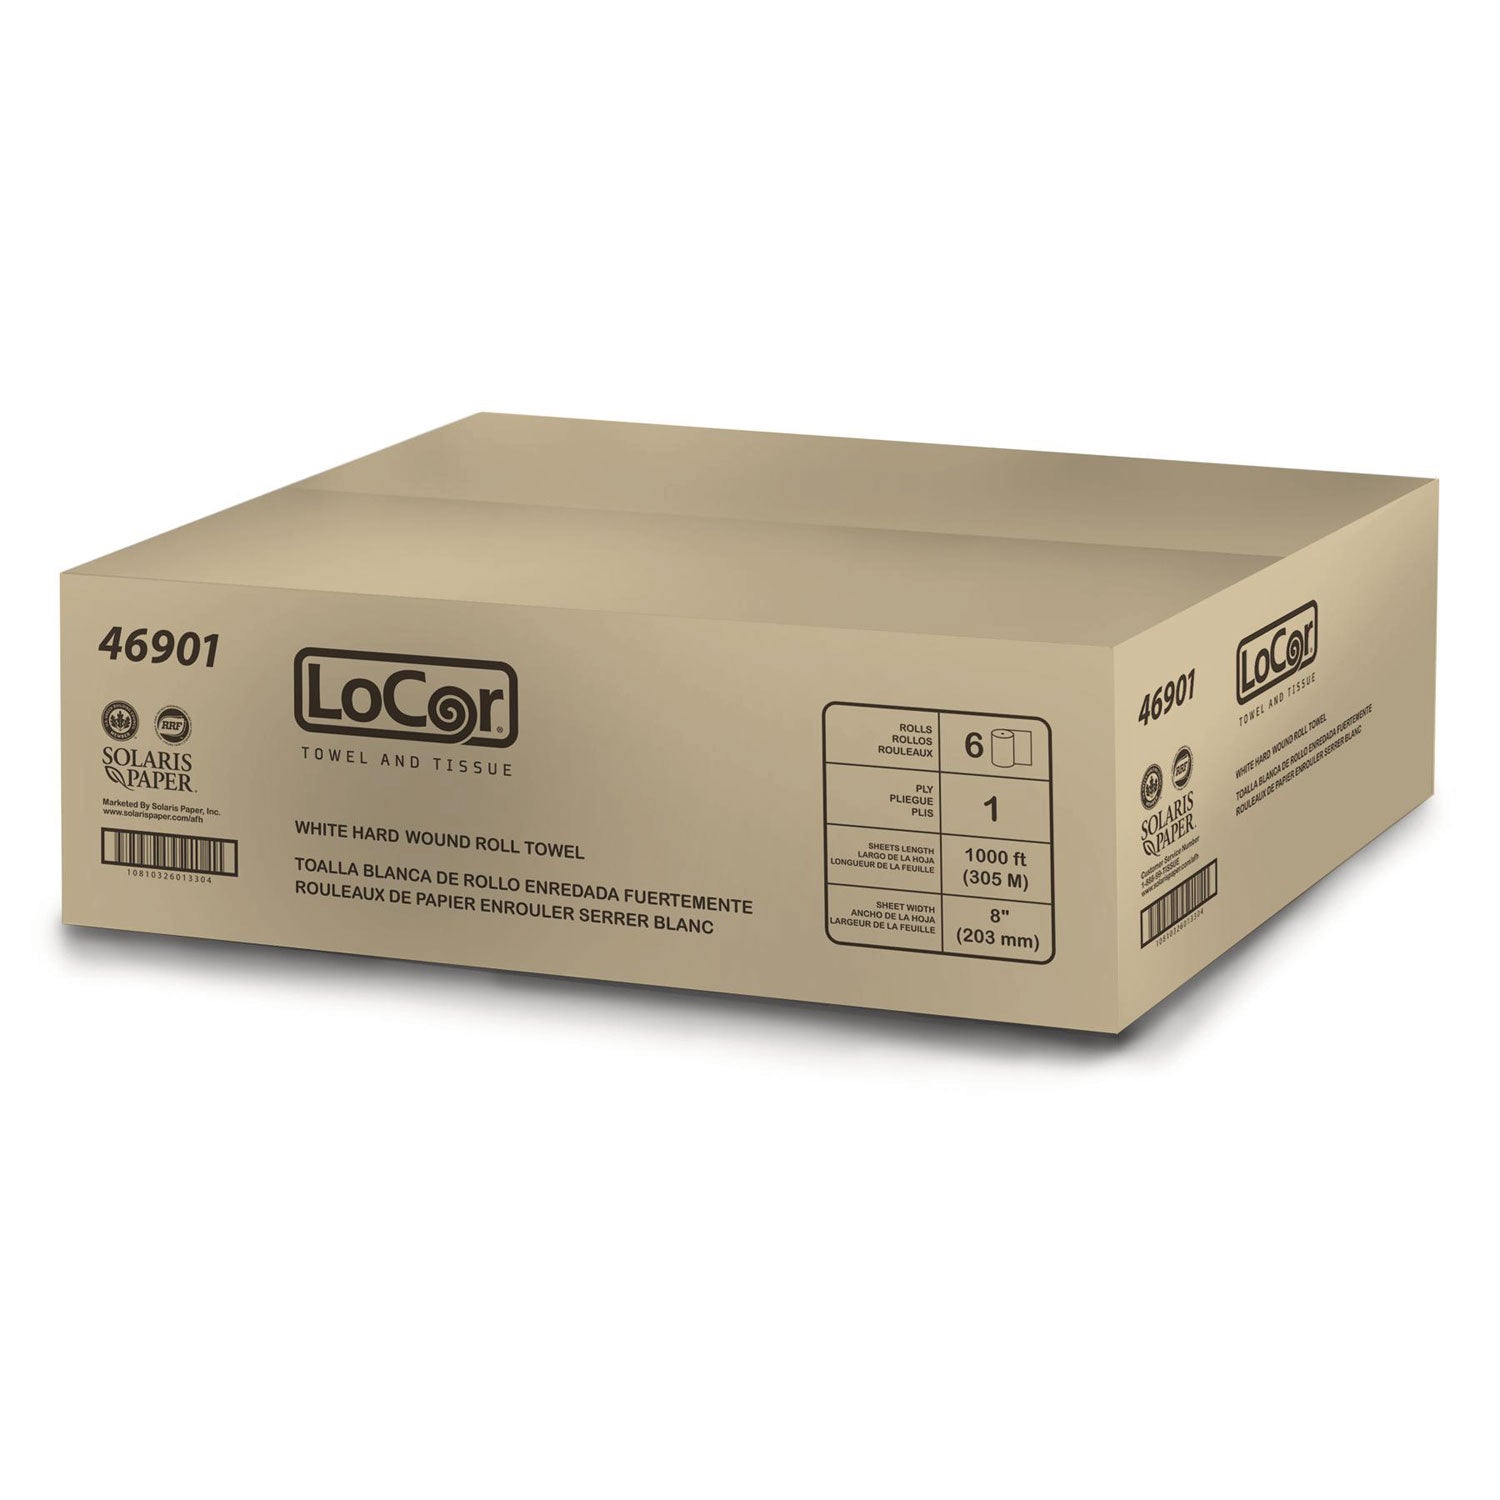 LoCor Hardwound Roll Towels - 1 Ply - 8" x 1000 ft - Bright White - Fiber - Eco-friendly, Soft, Absorbent, Strong - For Hand - 6 / Carton - 2